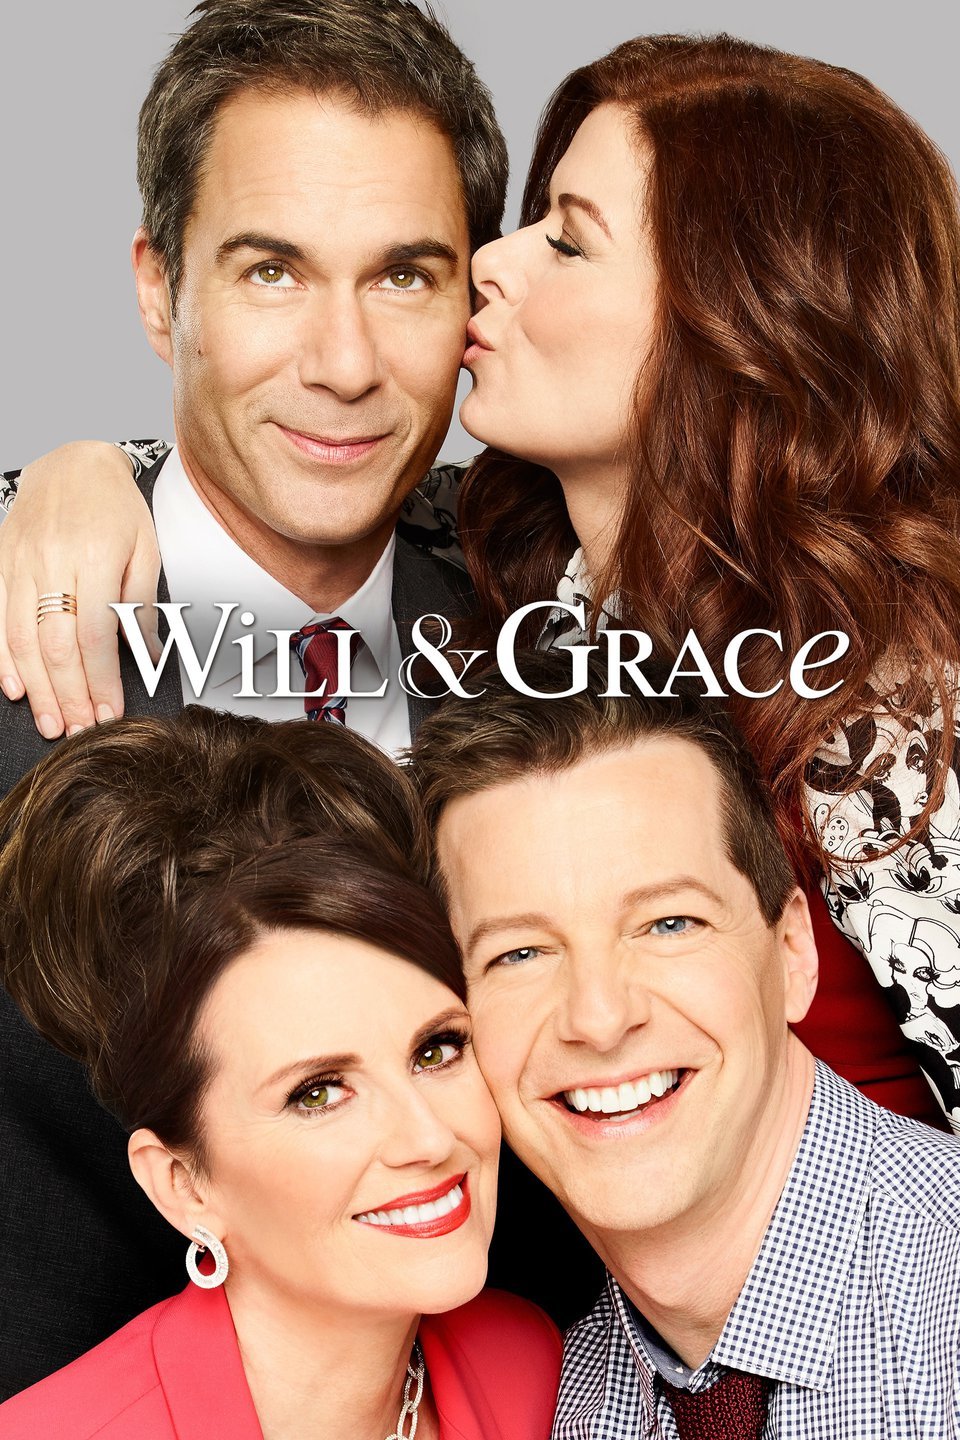 will and grace - Will & Grace Photo (18817422) - Fanpop